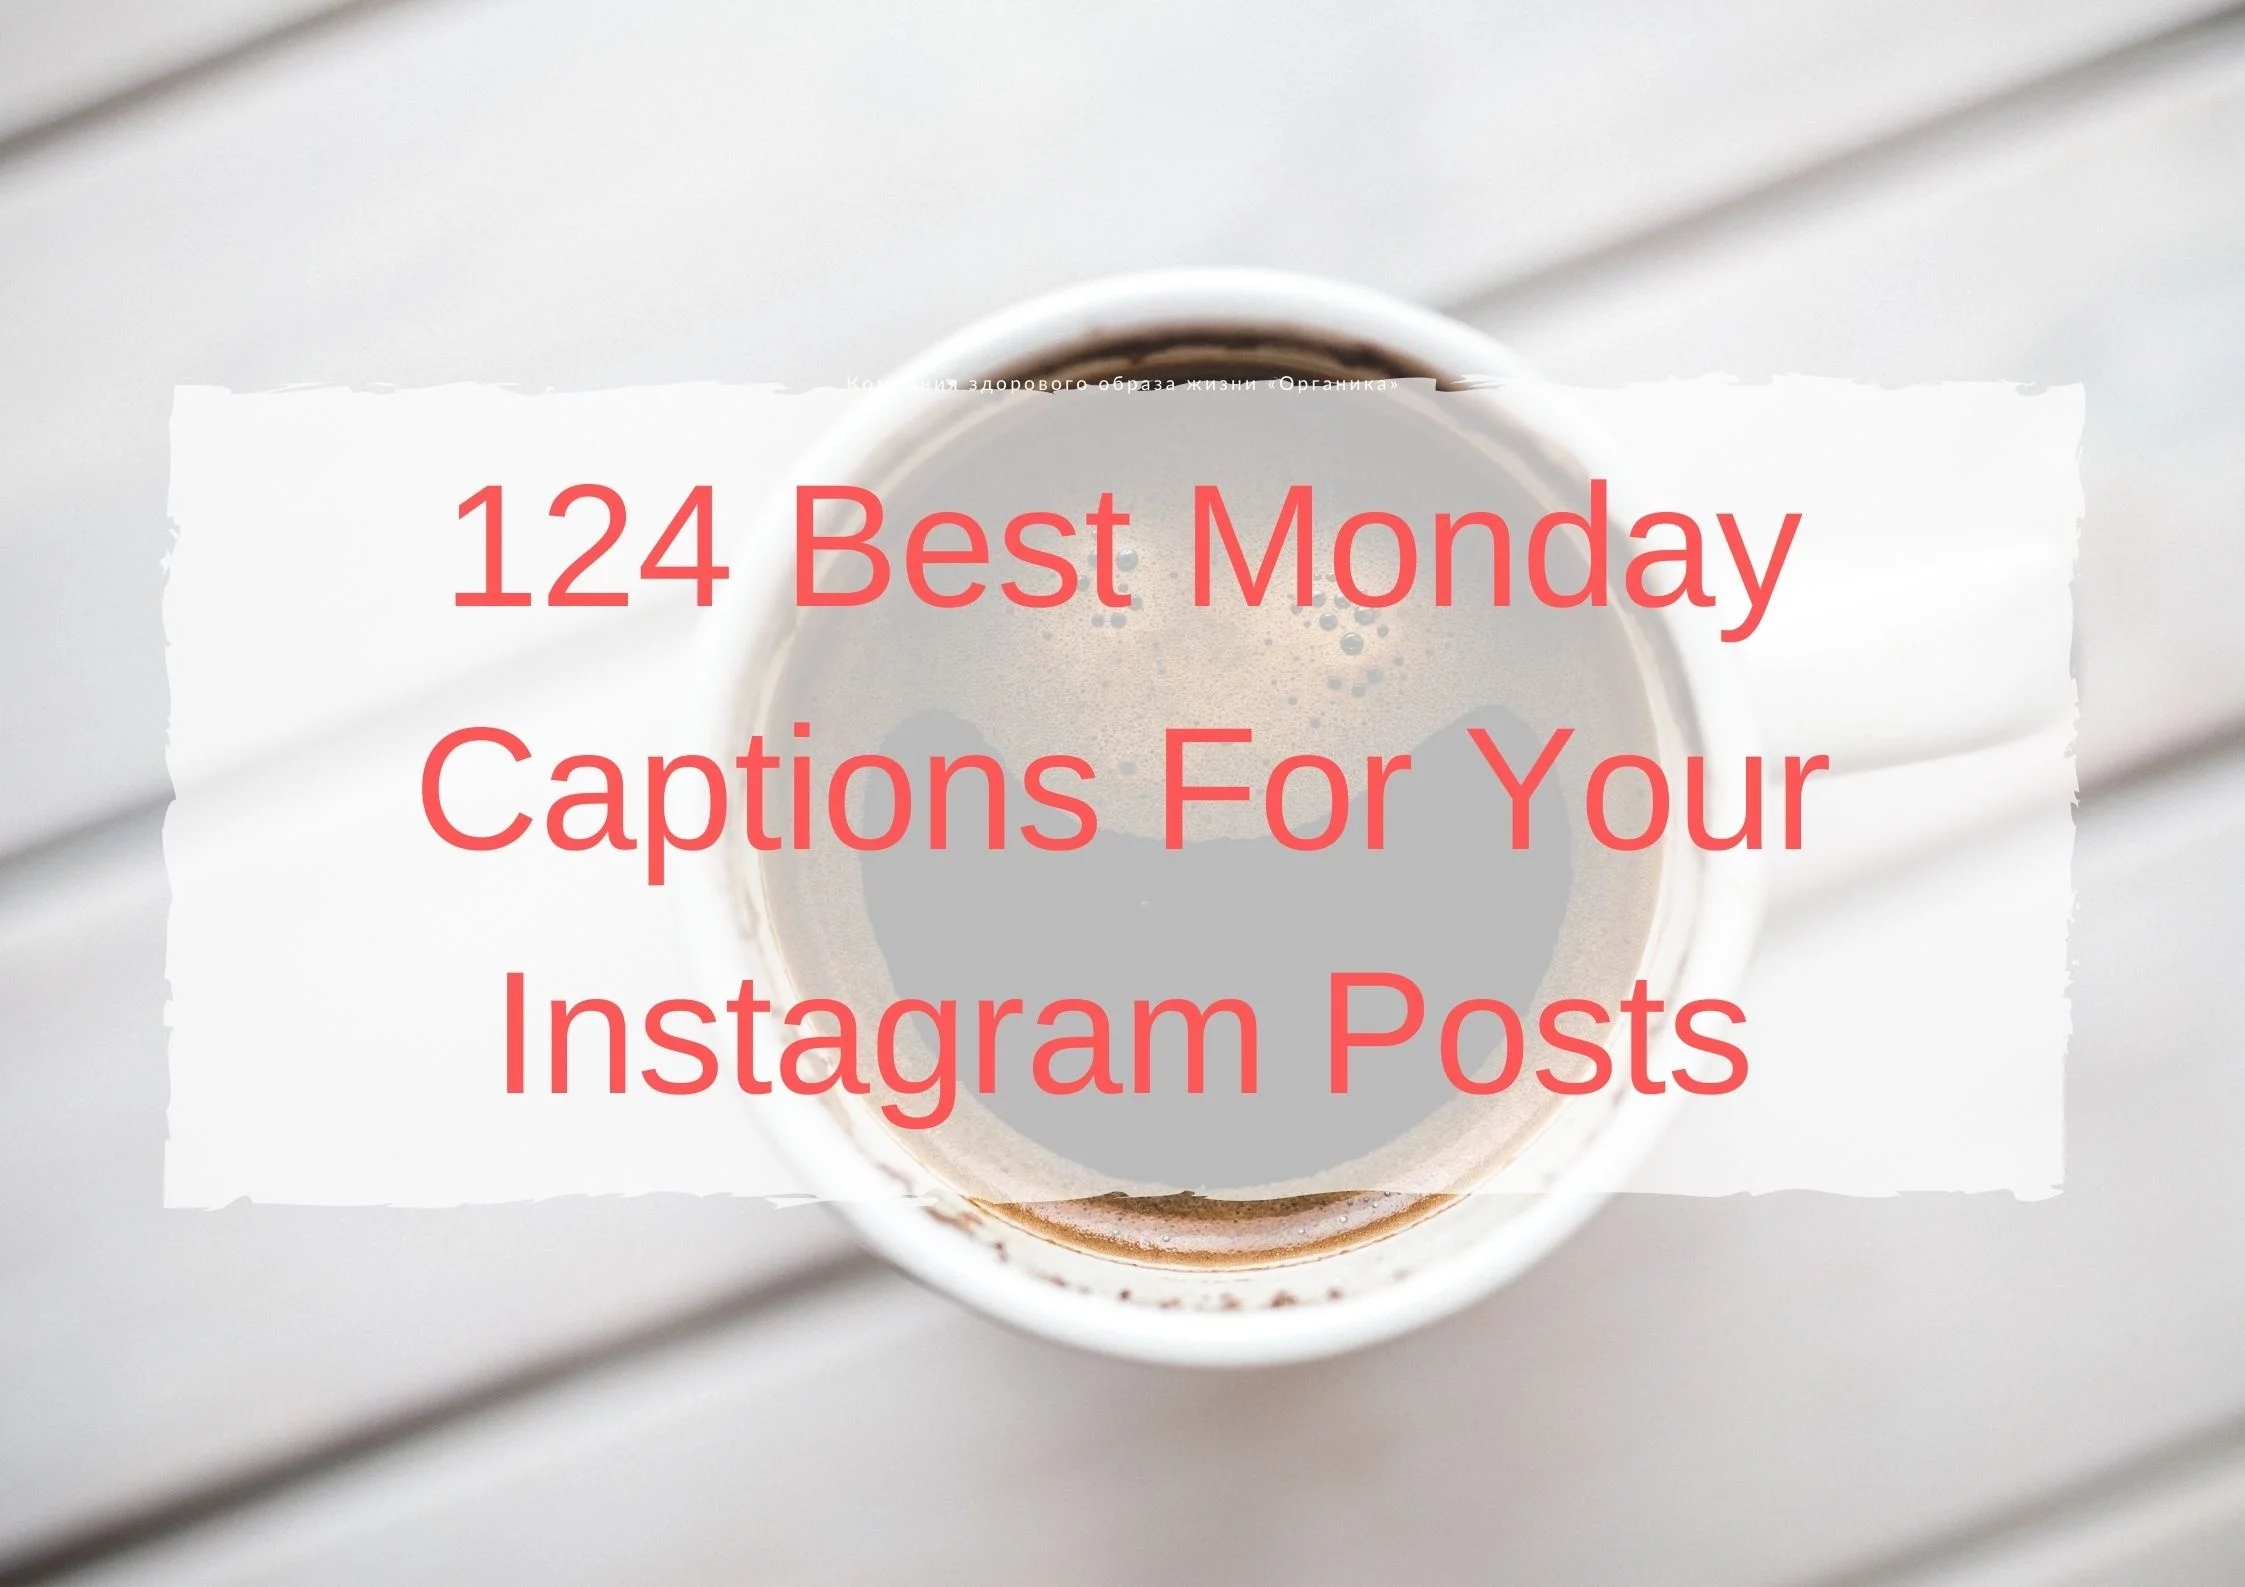 124 Best Monday Captions For Your Instagram Posts